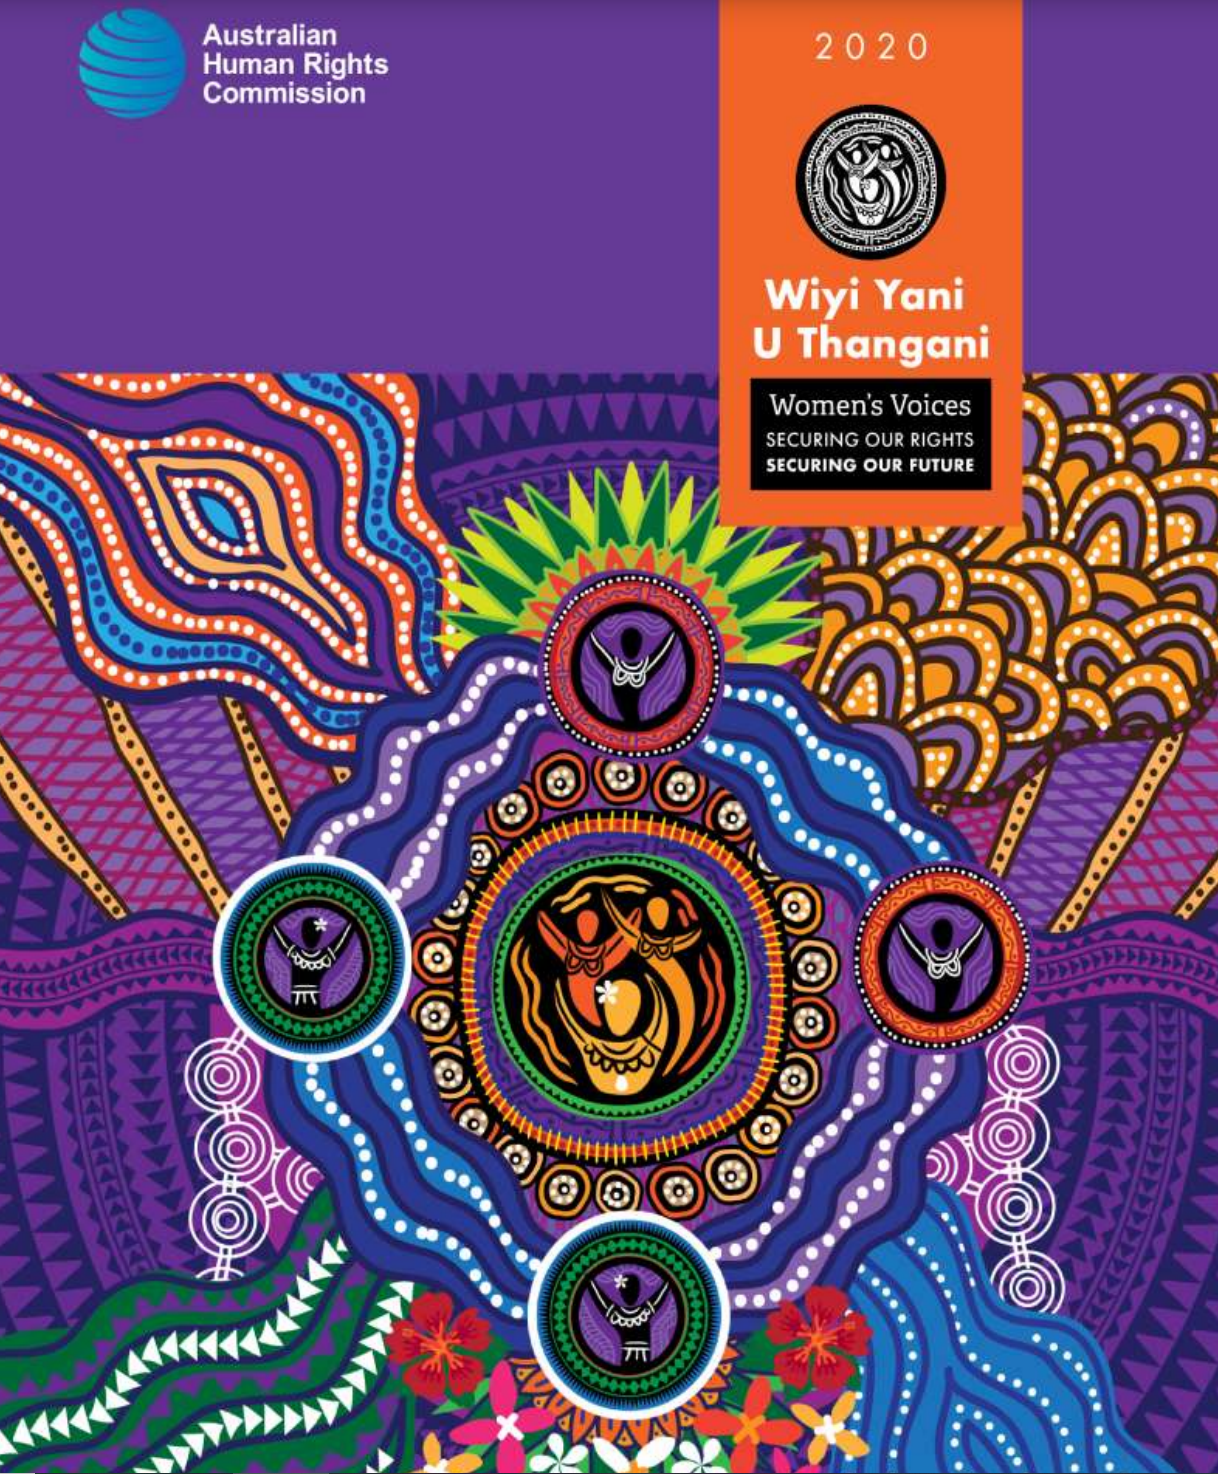 Cover art for: Wiyi Yani U Thangani (Women’s Voices): Securing Our Rights, Securing Our Future  Report 2020